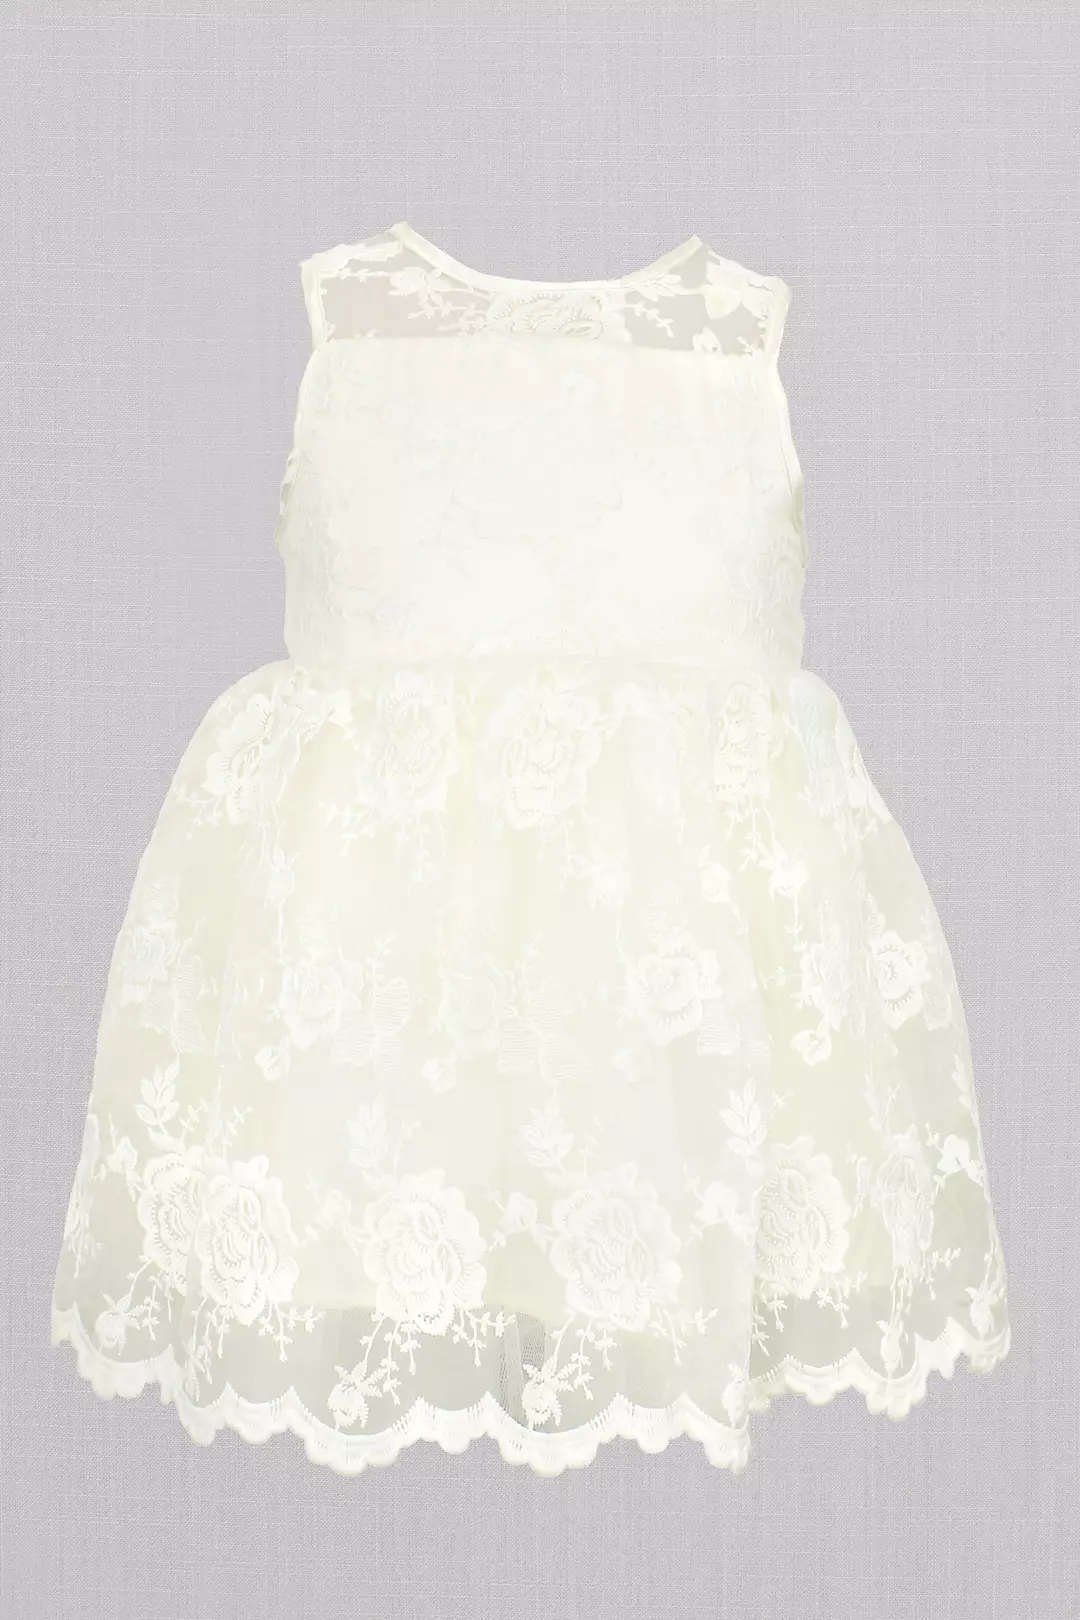 Embroidered Lace Sleeveless Flower Girl Dress Image